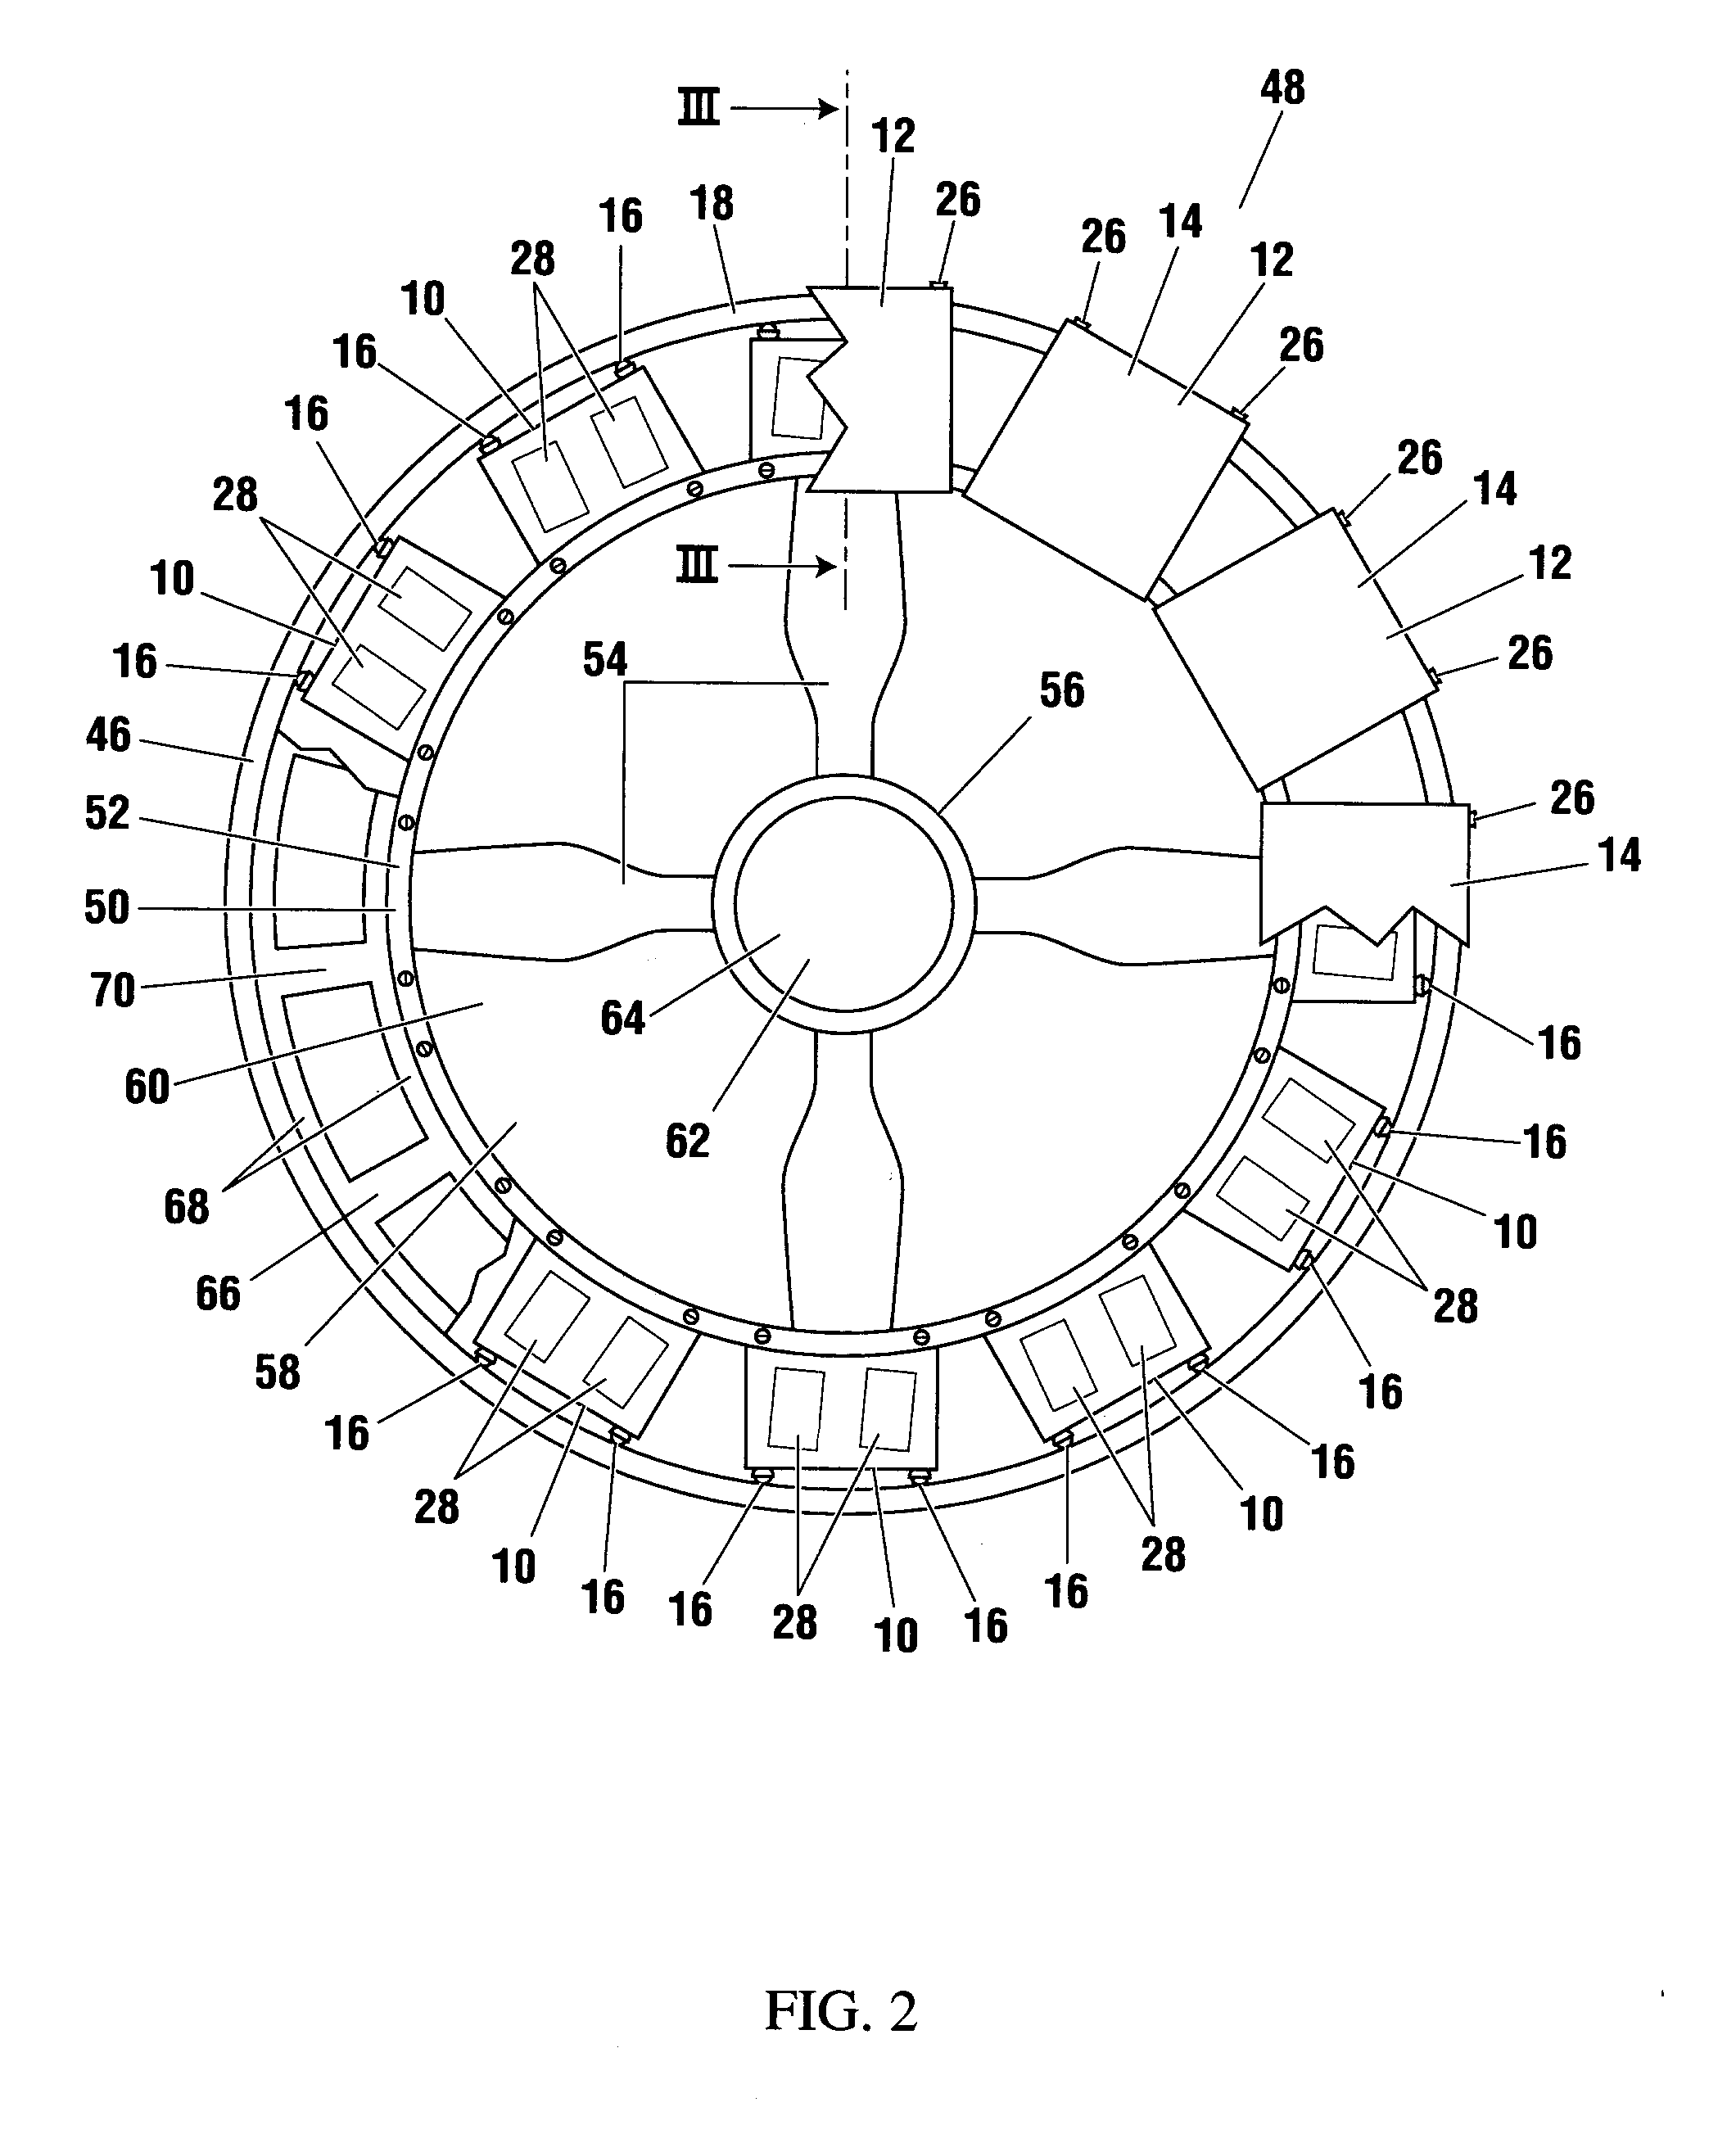 Axial air gap machine having stator and rotor discs formed of multiple detachable segments